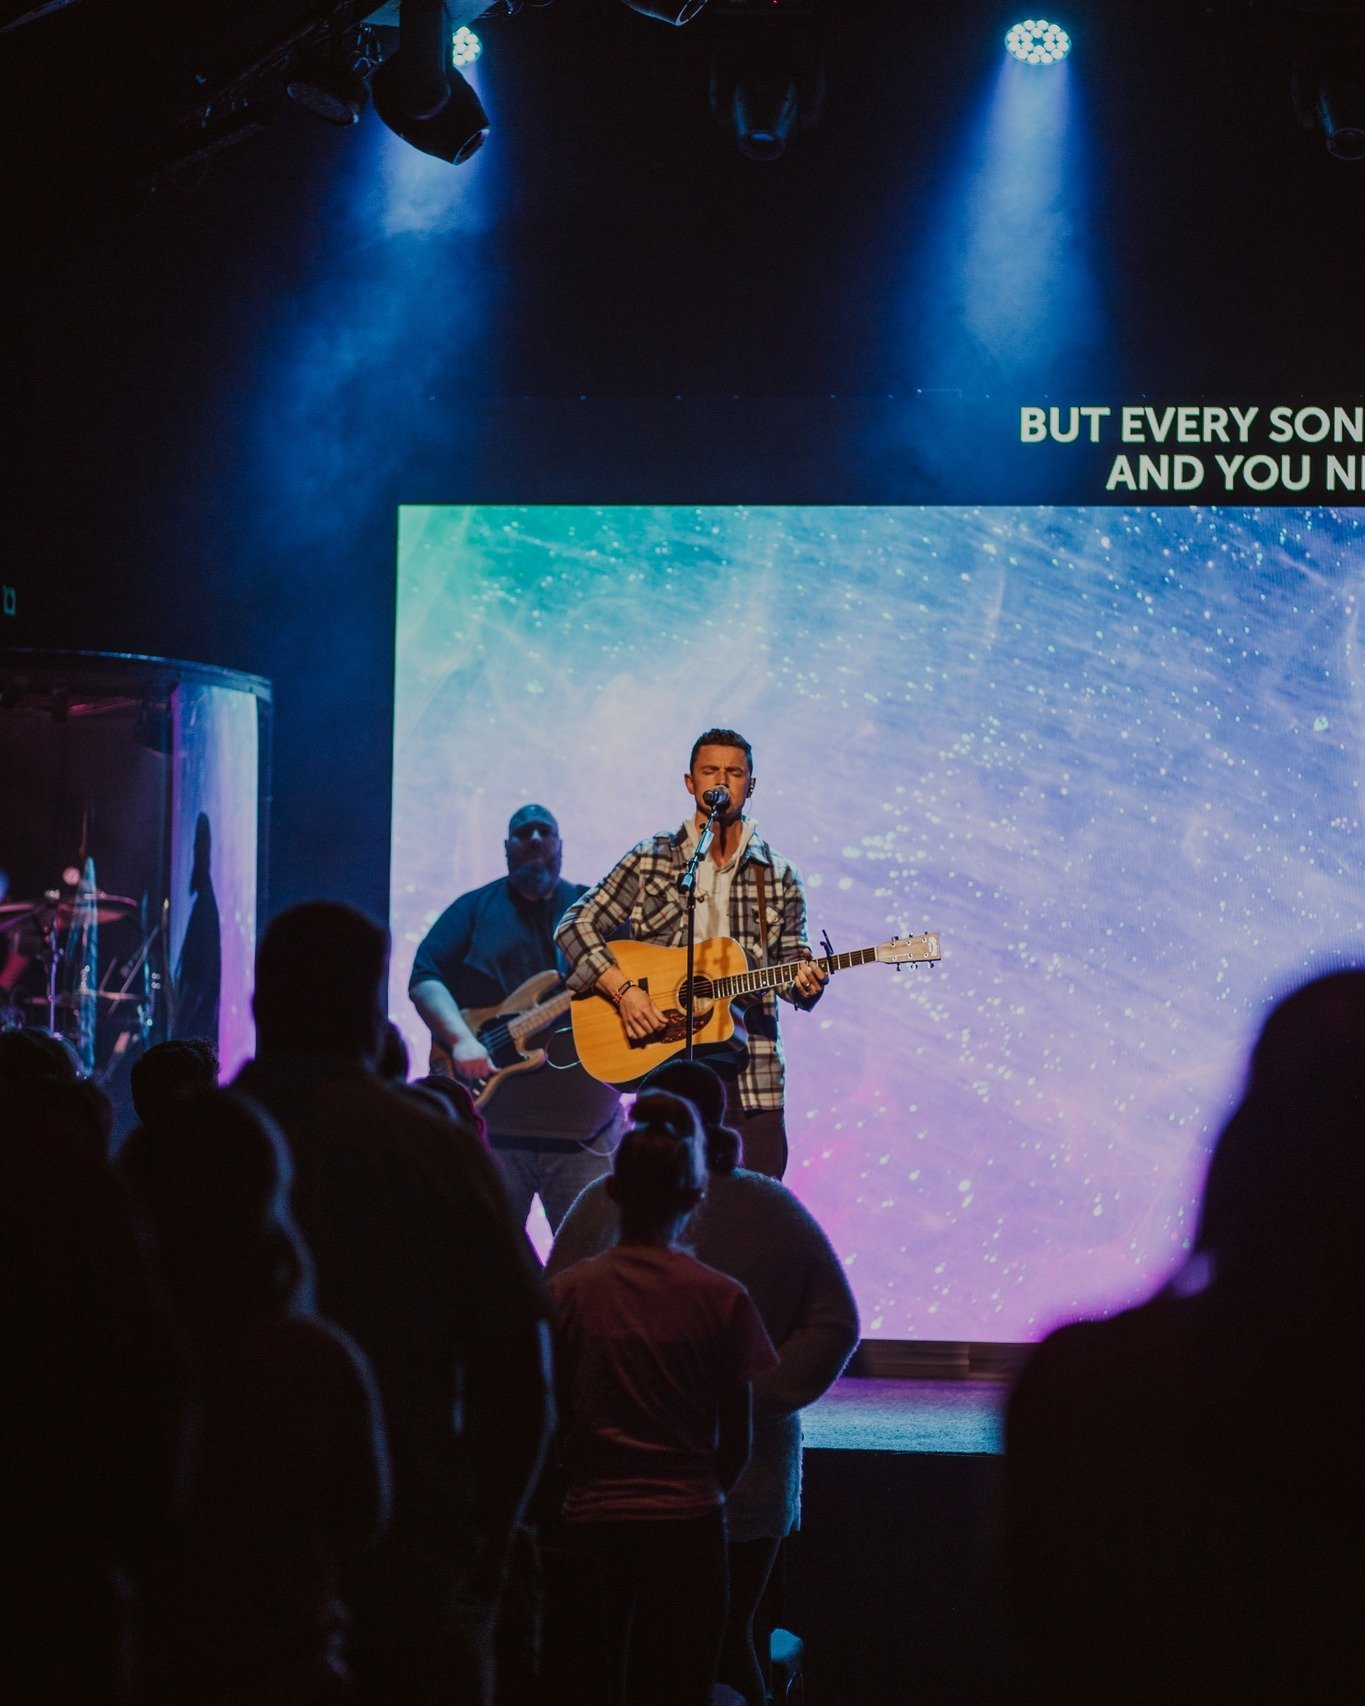 Rise &amp; shine, church fam ☀️ We're excited to have guest speaker, Bob Merritt, with us this morning! It's a great day to worship together 🙌

✨ 57th Street: 8, 9:15, 10:45, &amp; 11:55 am
✨ Sertoma: 9 &amp; 10:30 am
✨ Tea: 8:45, 10, &amp; 11:15 am